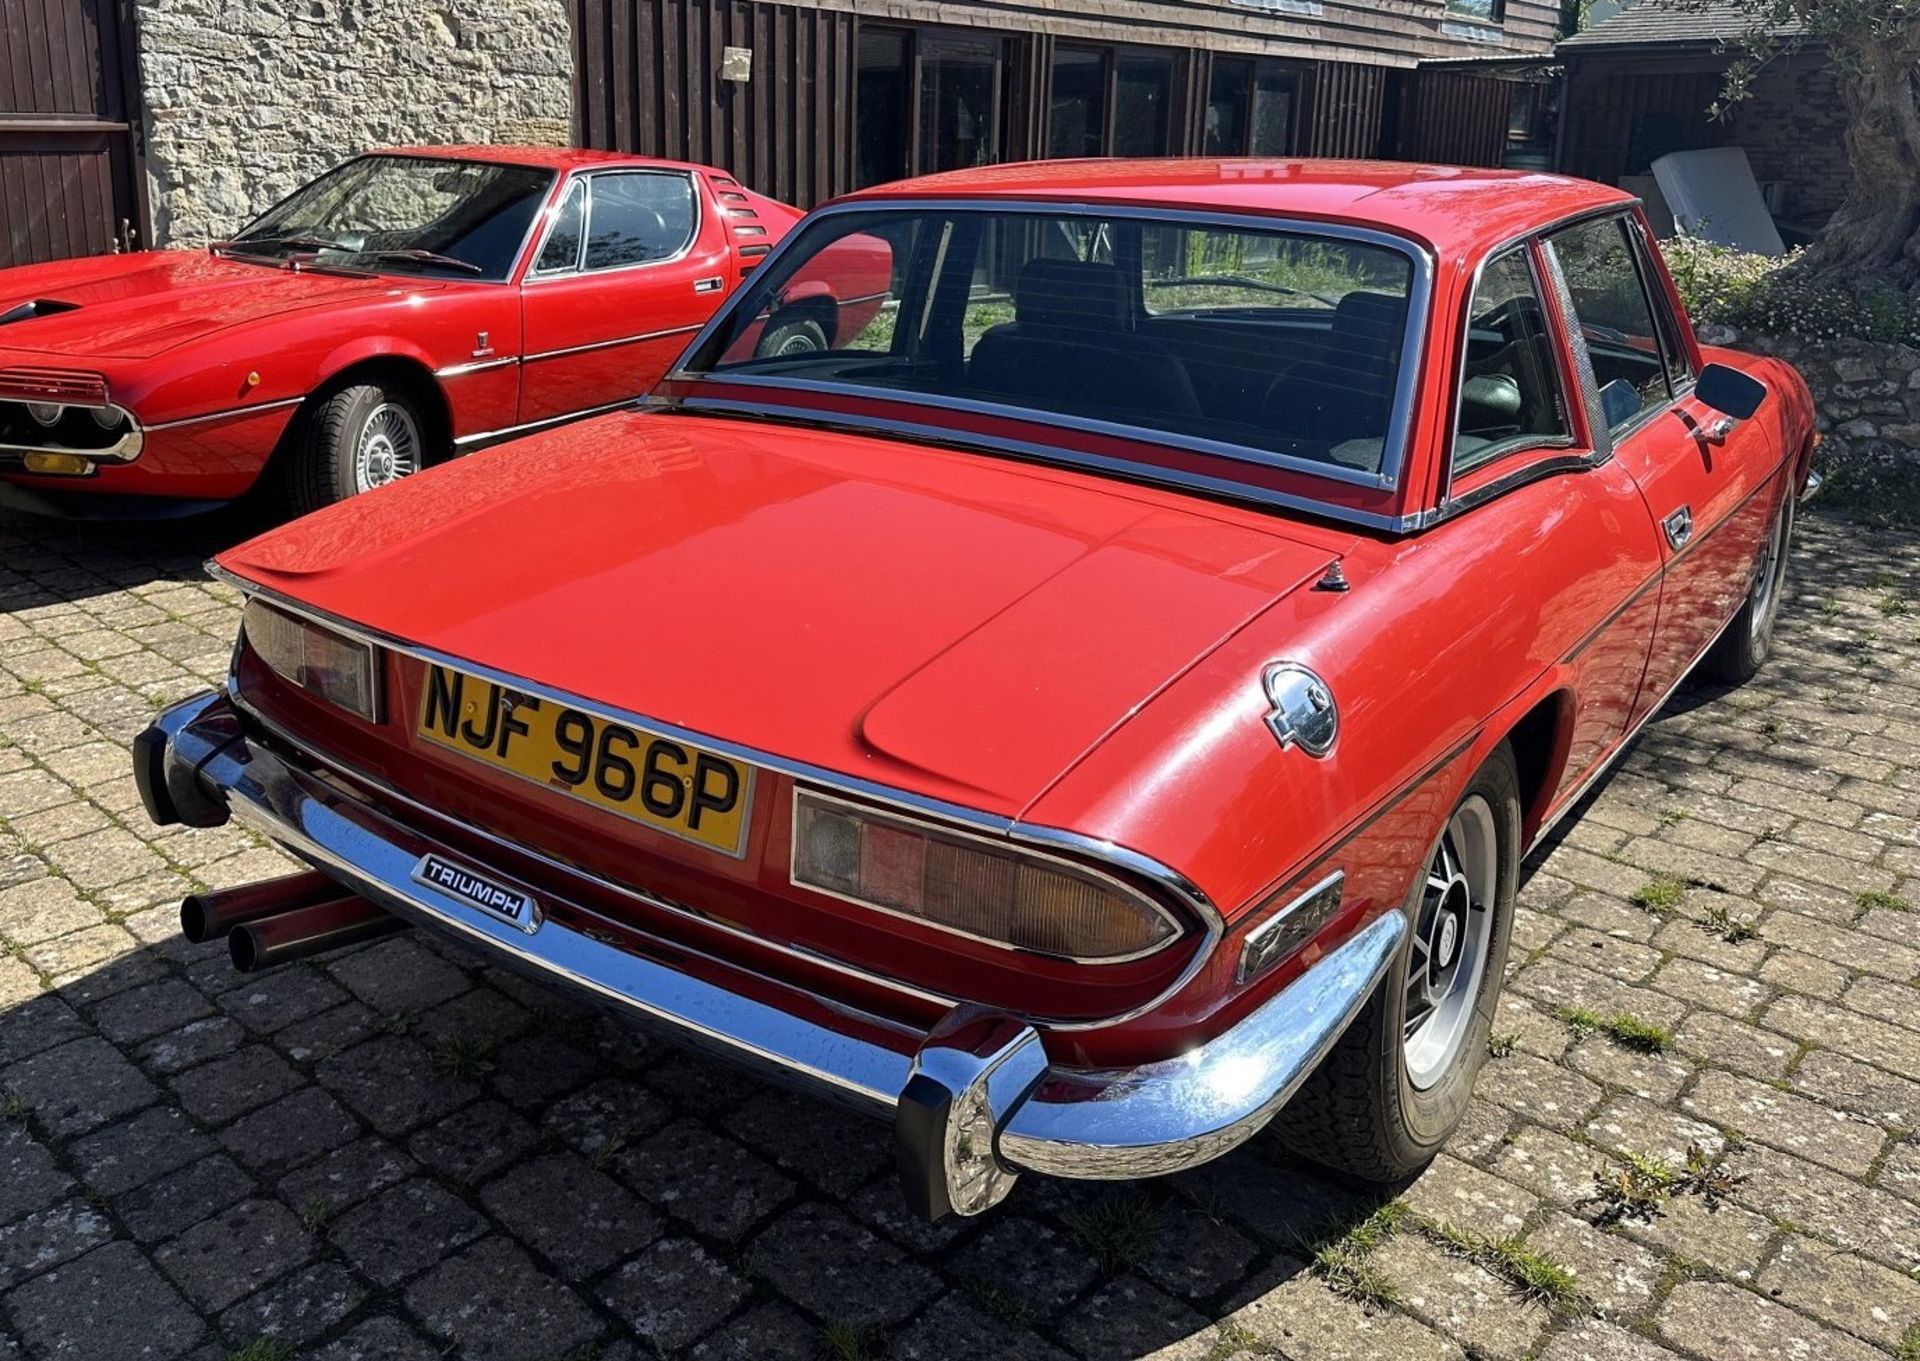 1976 Triumph Stag Registration number NJF 966P Chassis number LD413020 Engine number LF041276HE - Image 19 of 57